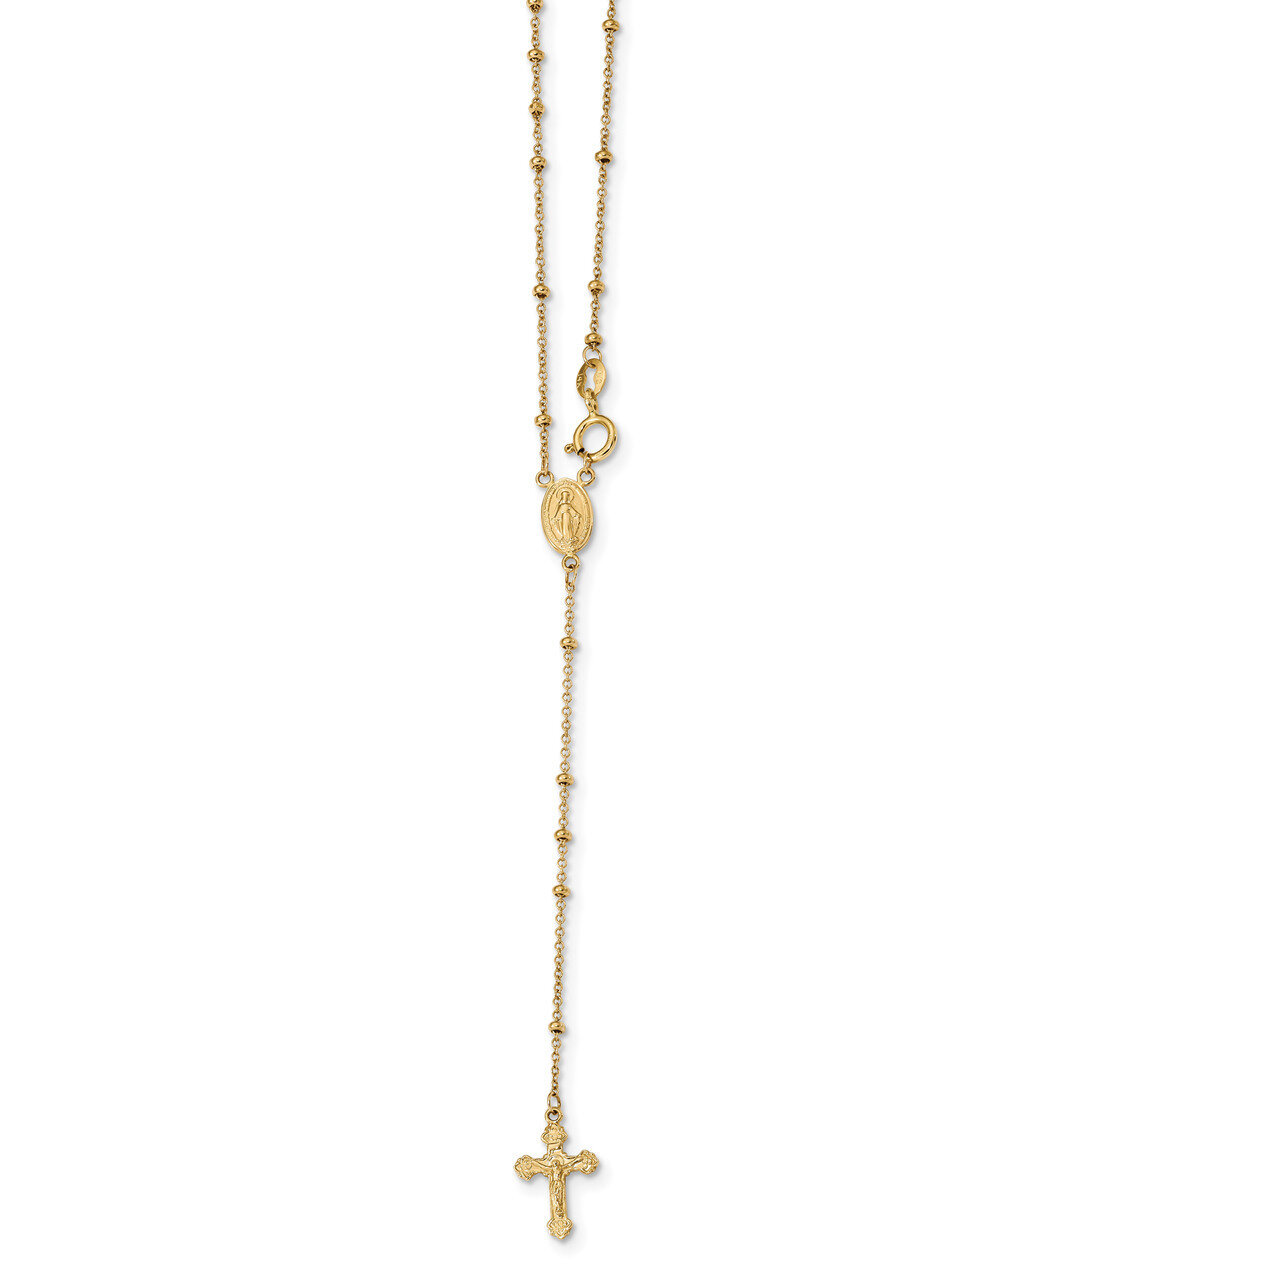 19.5 Inch 2mm Beaded Rosary Necklace 14k Gold Polished SF2515-19.5